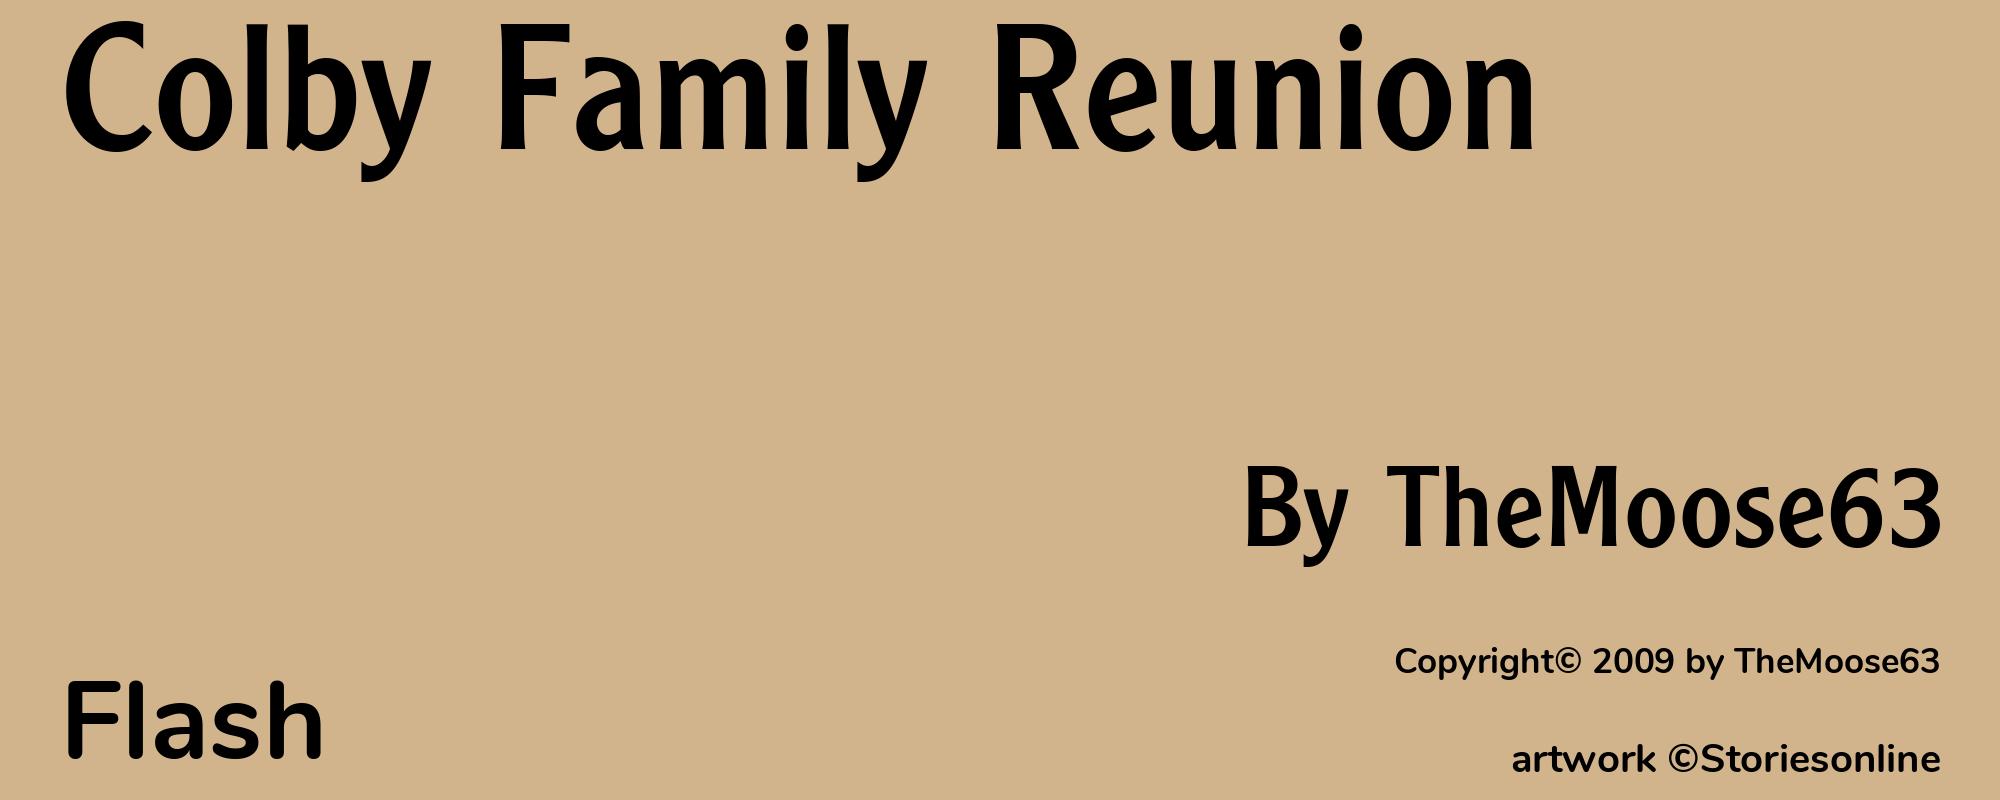 Colby Family Reunion - Cover